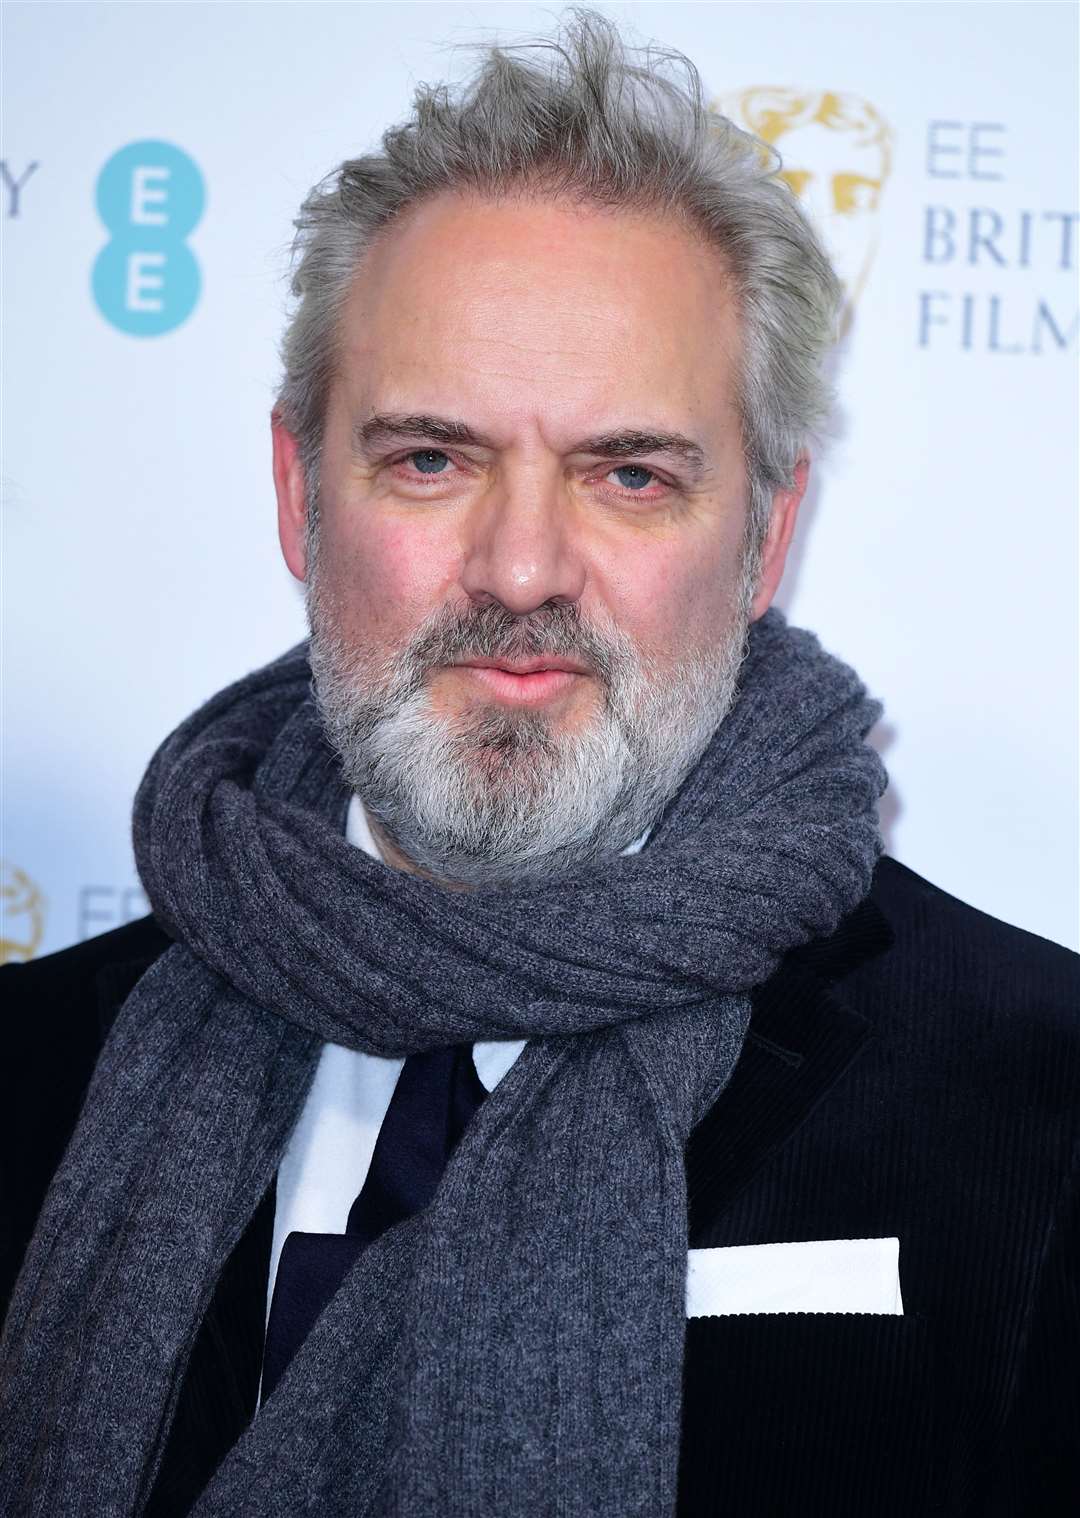 Bafta-winning British director Sir Sam Mendes is being knighted for services to drama (Ian West/PA)